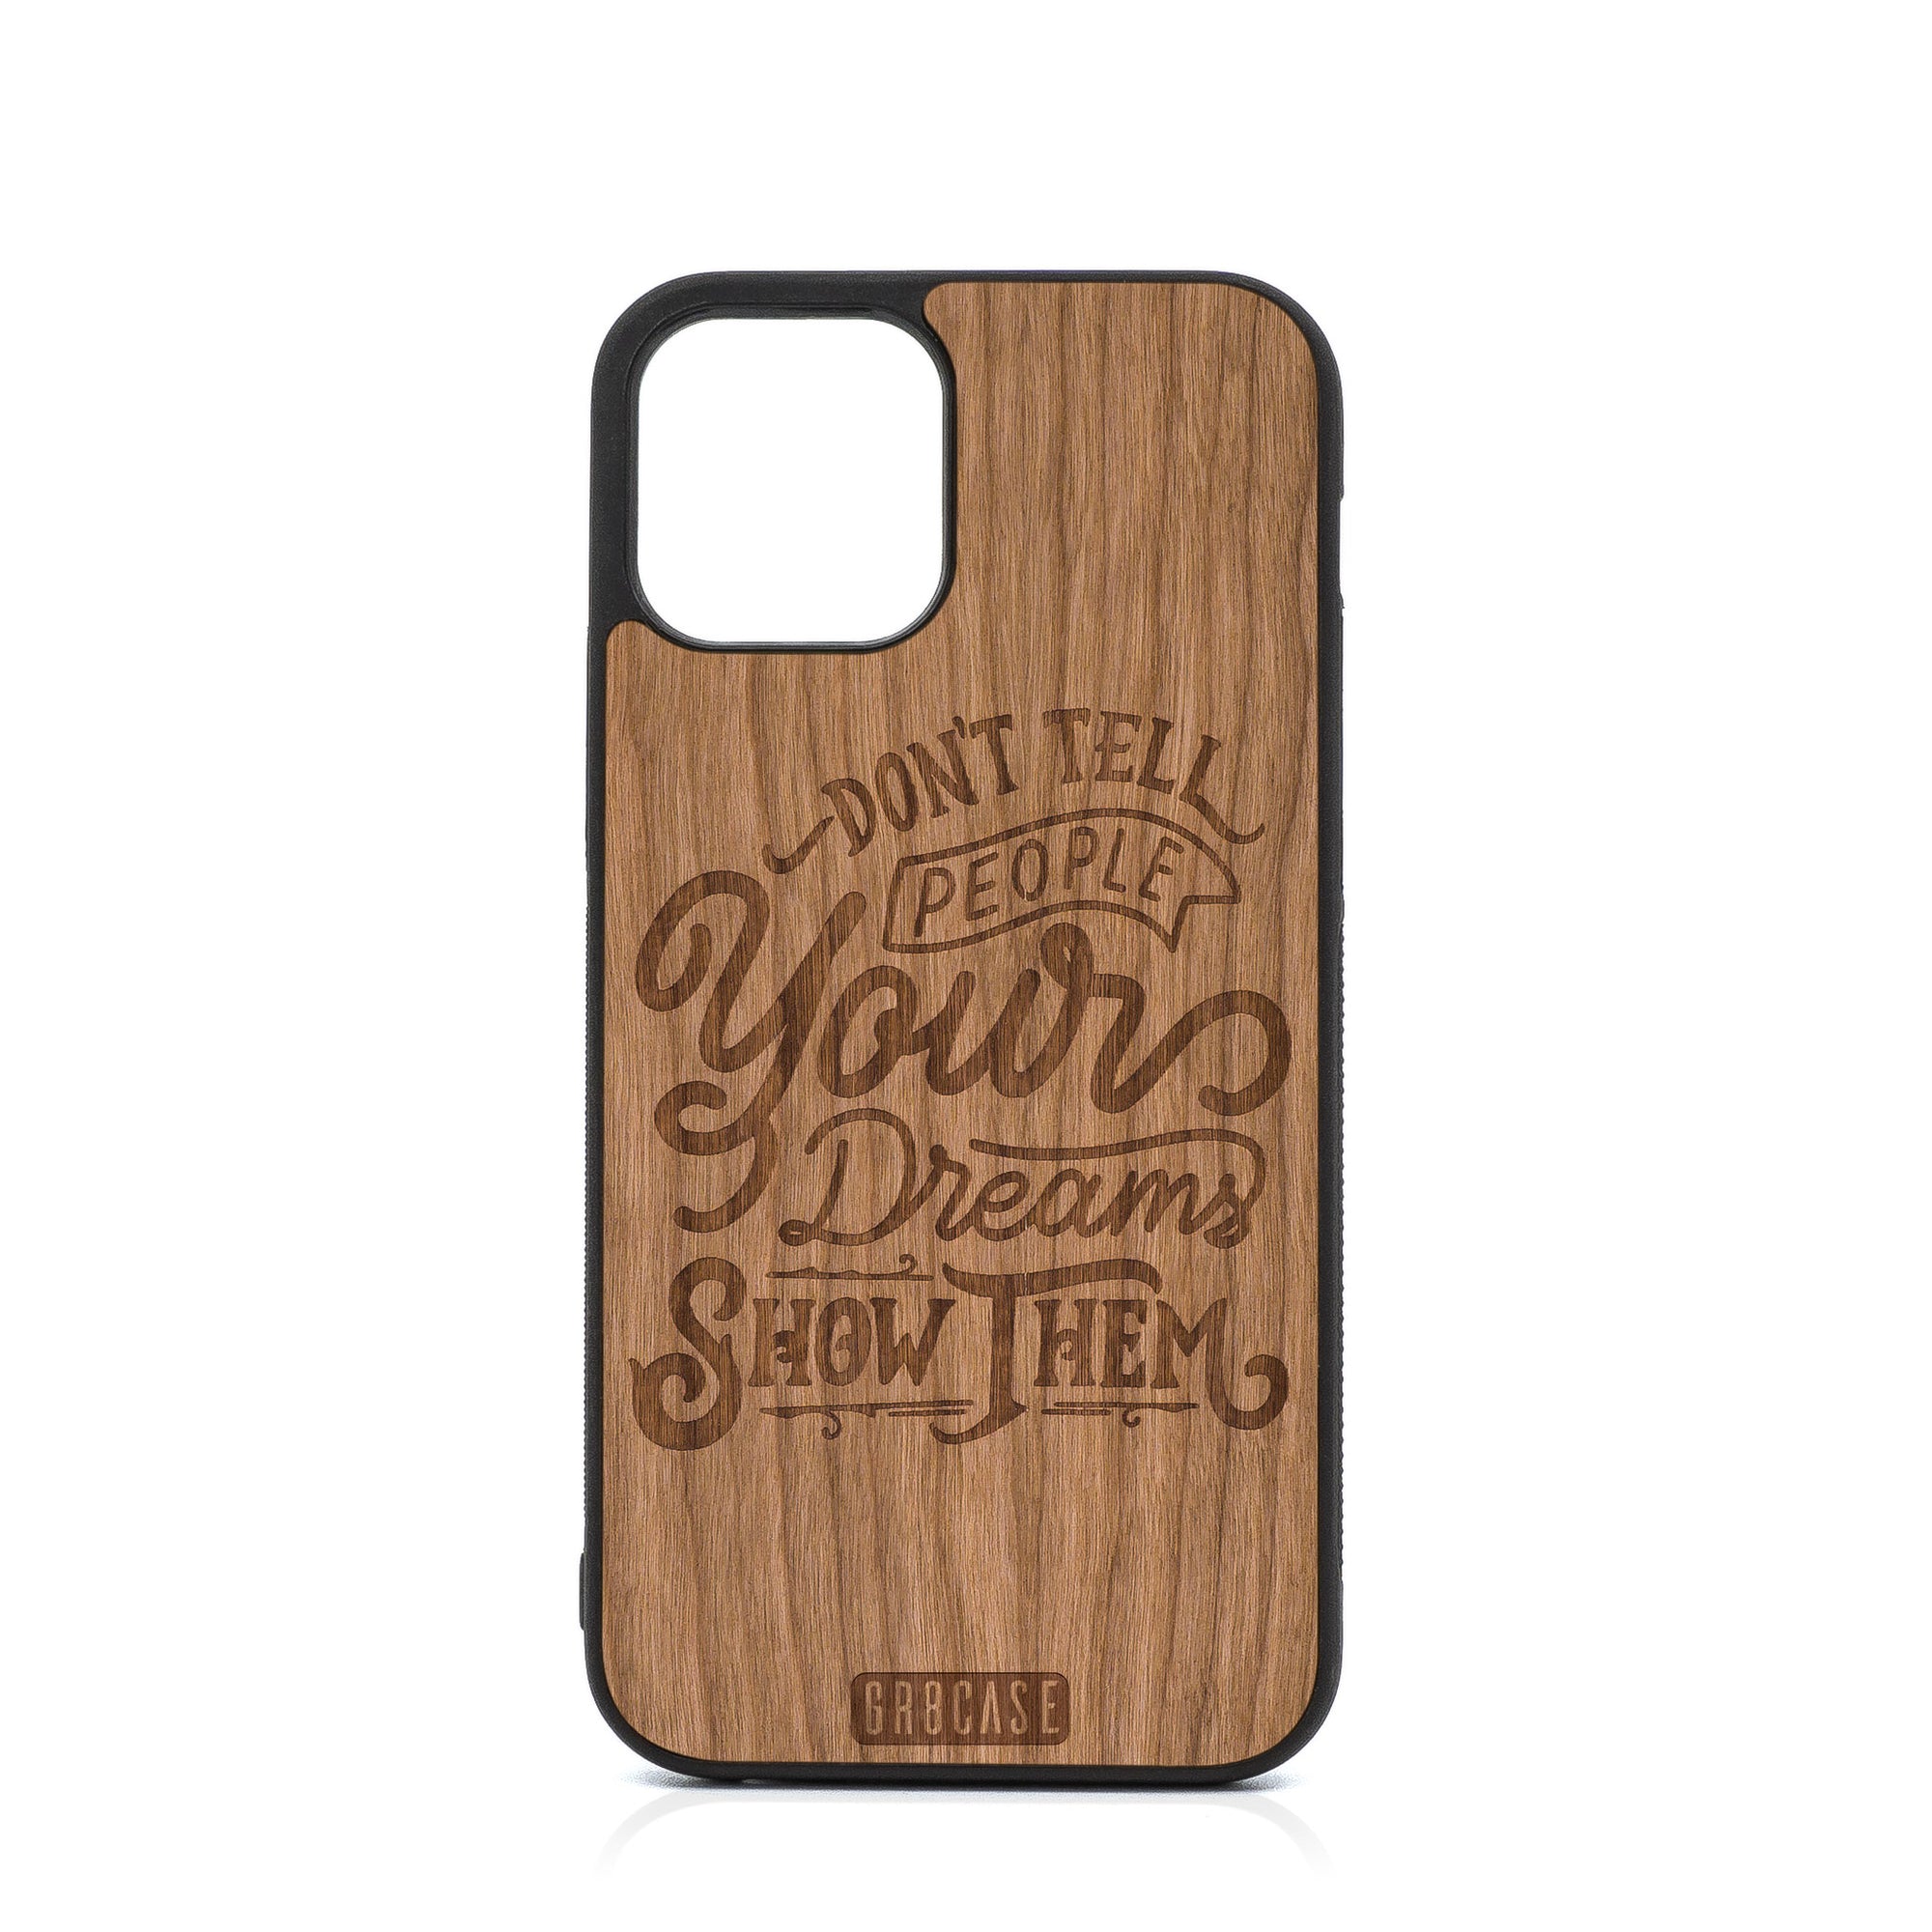 Don't Tell People Your Dreams Show Them Design Wood Case For iPhone 12